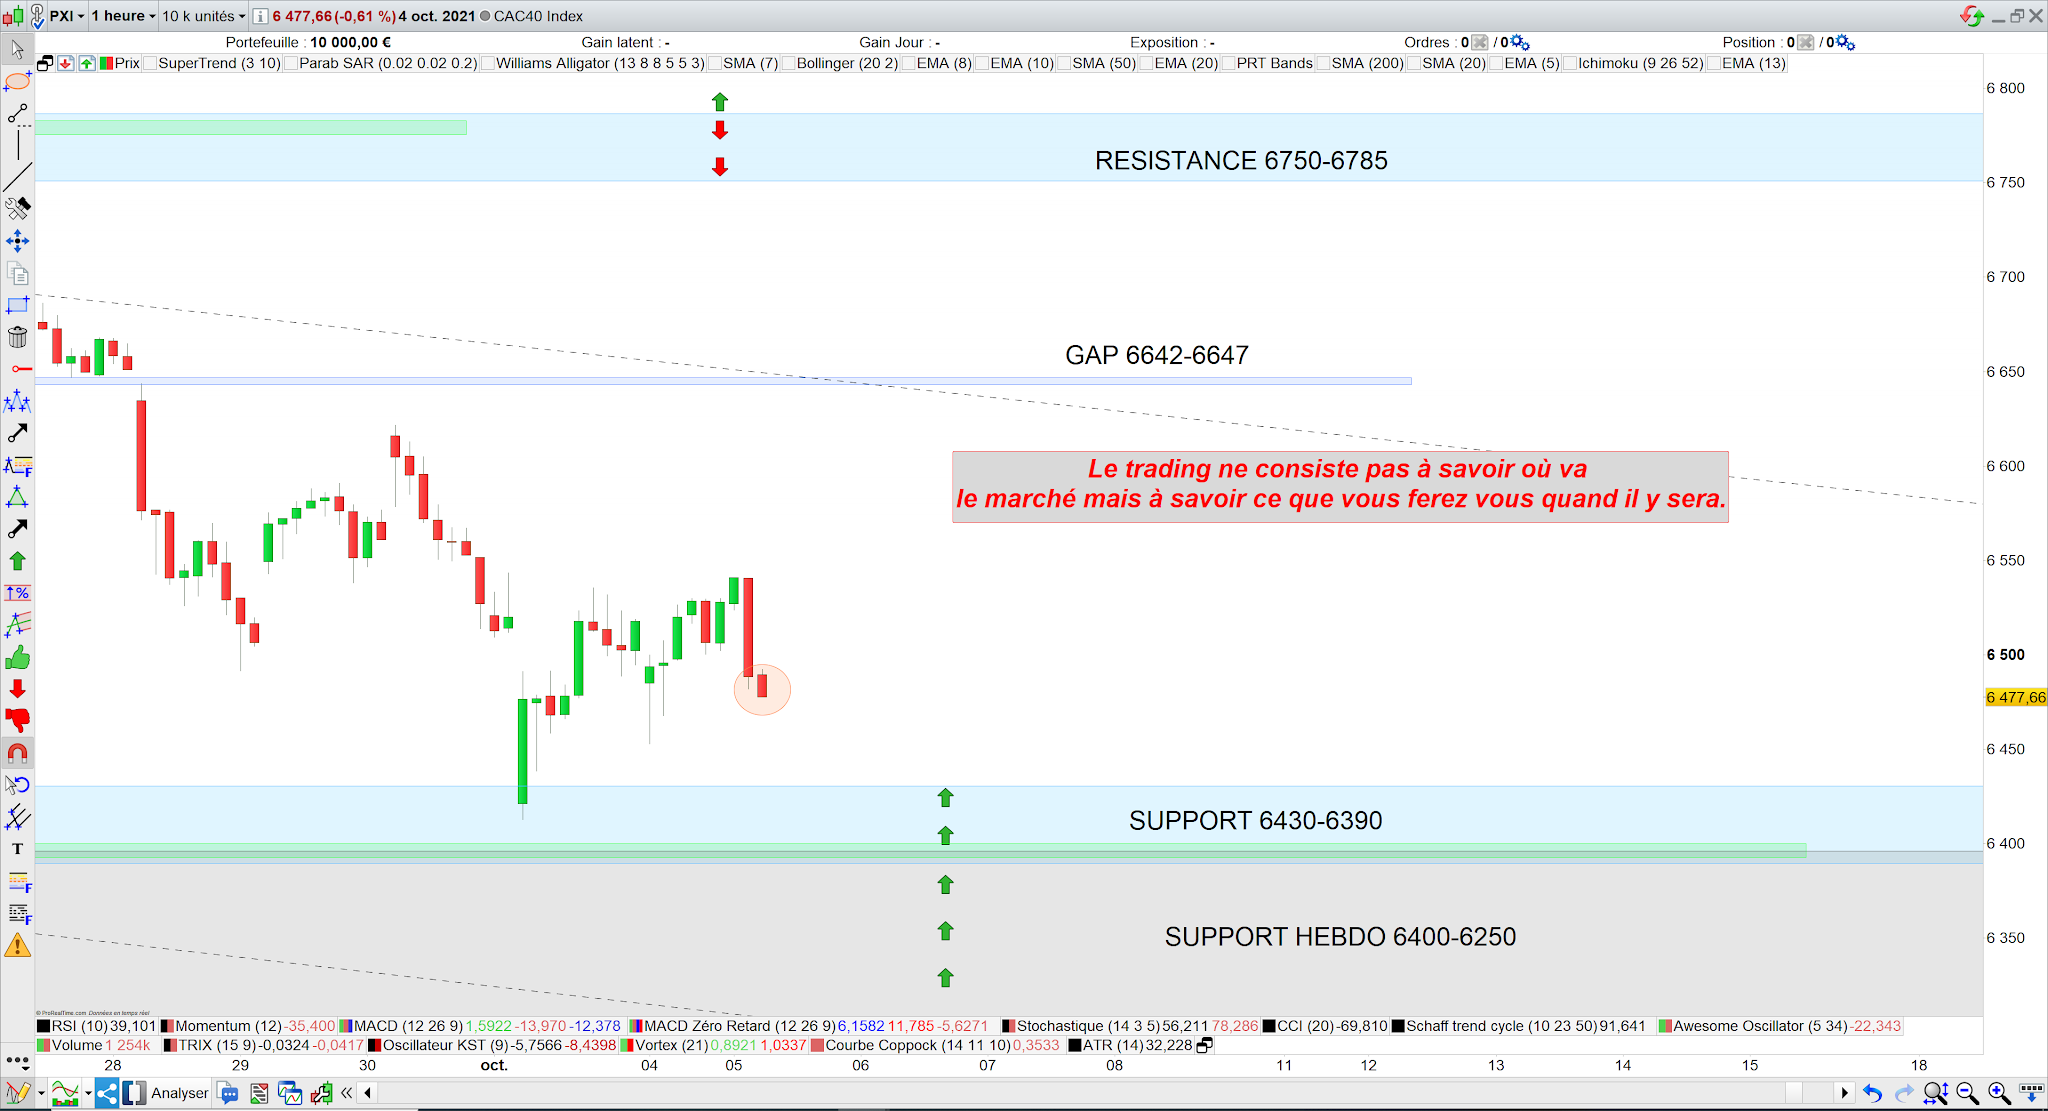 Trading cac40 05/10/21